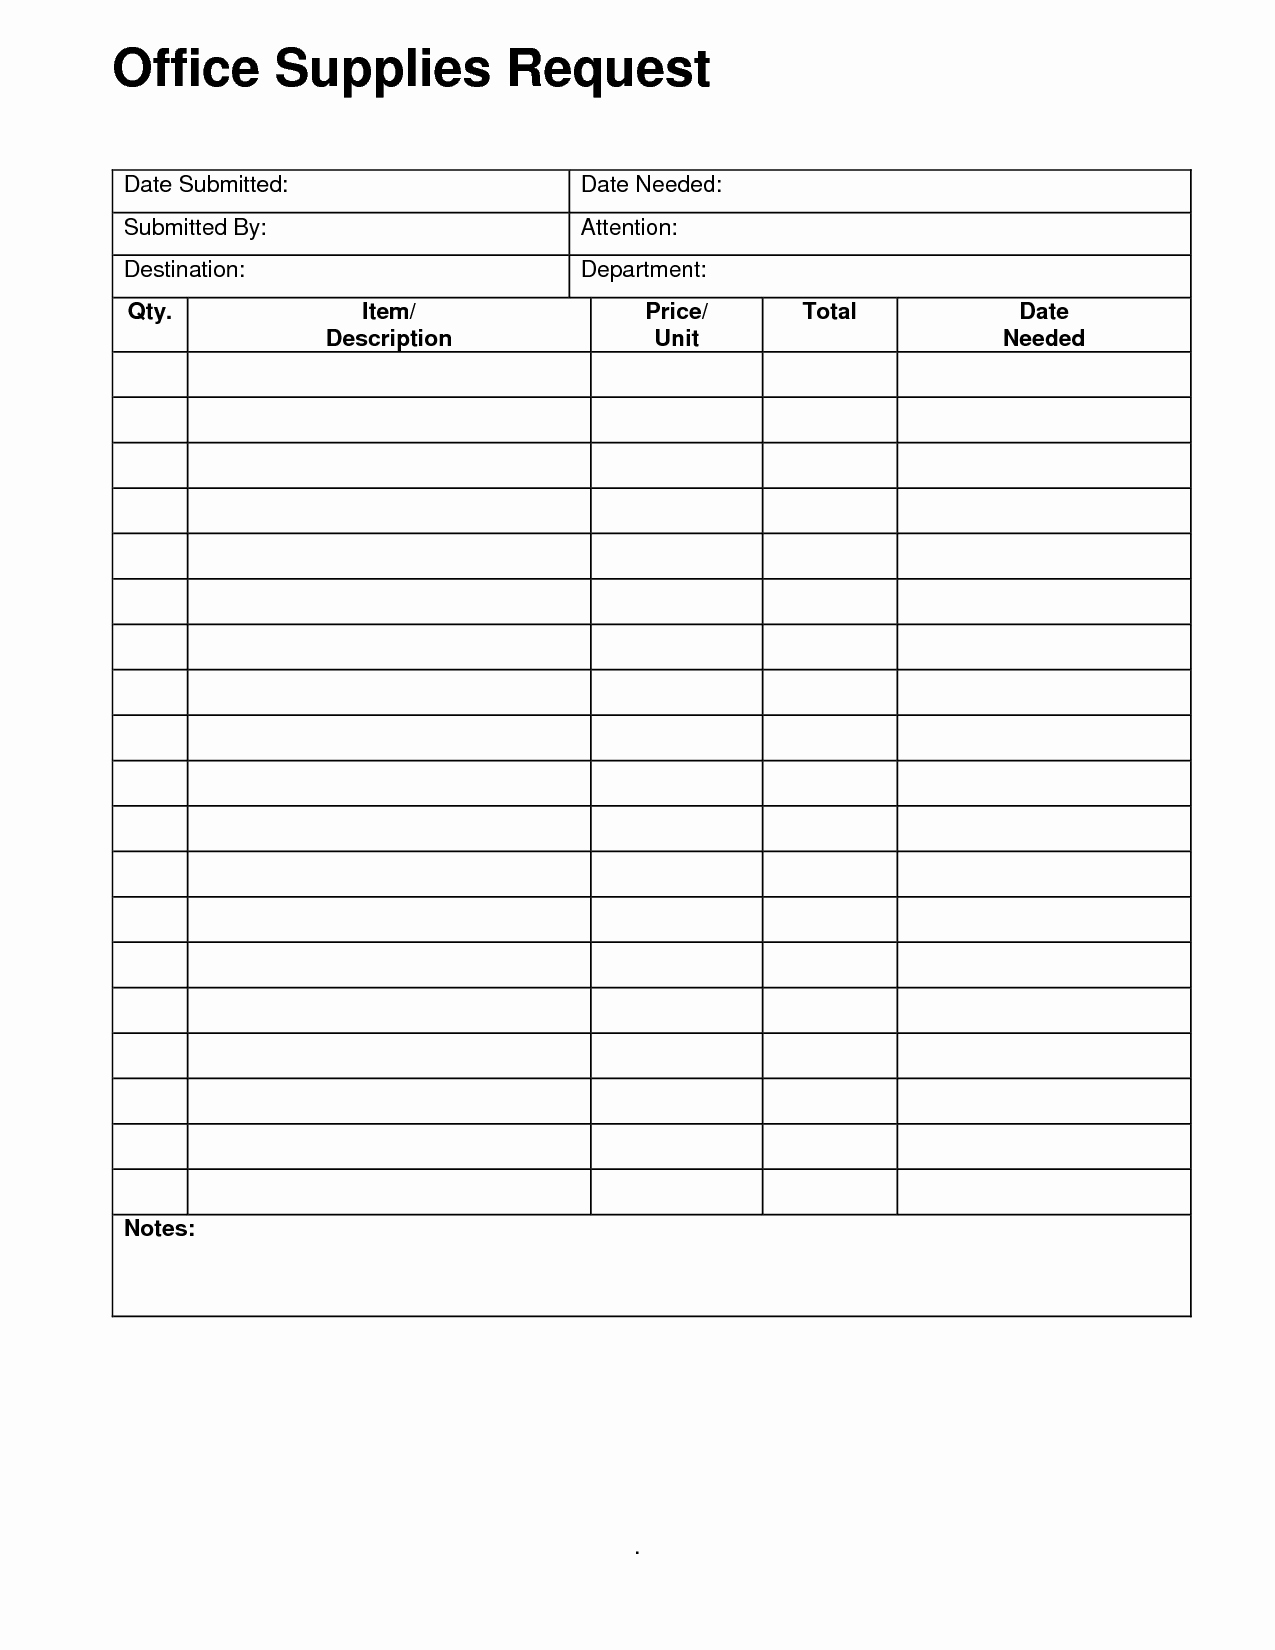 Supply order form Template New Fice Supply Checklist Templates for Your Business Violeet